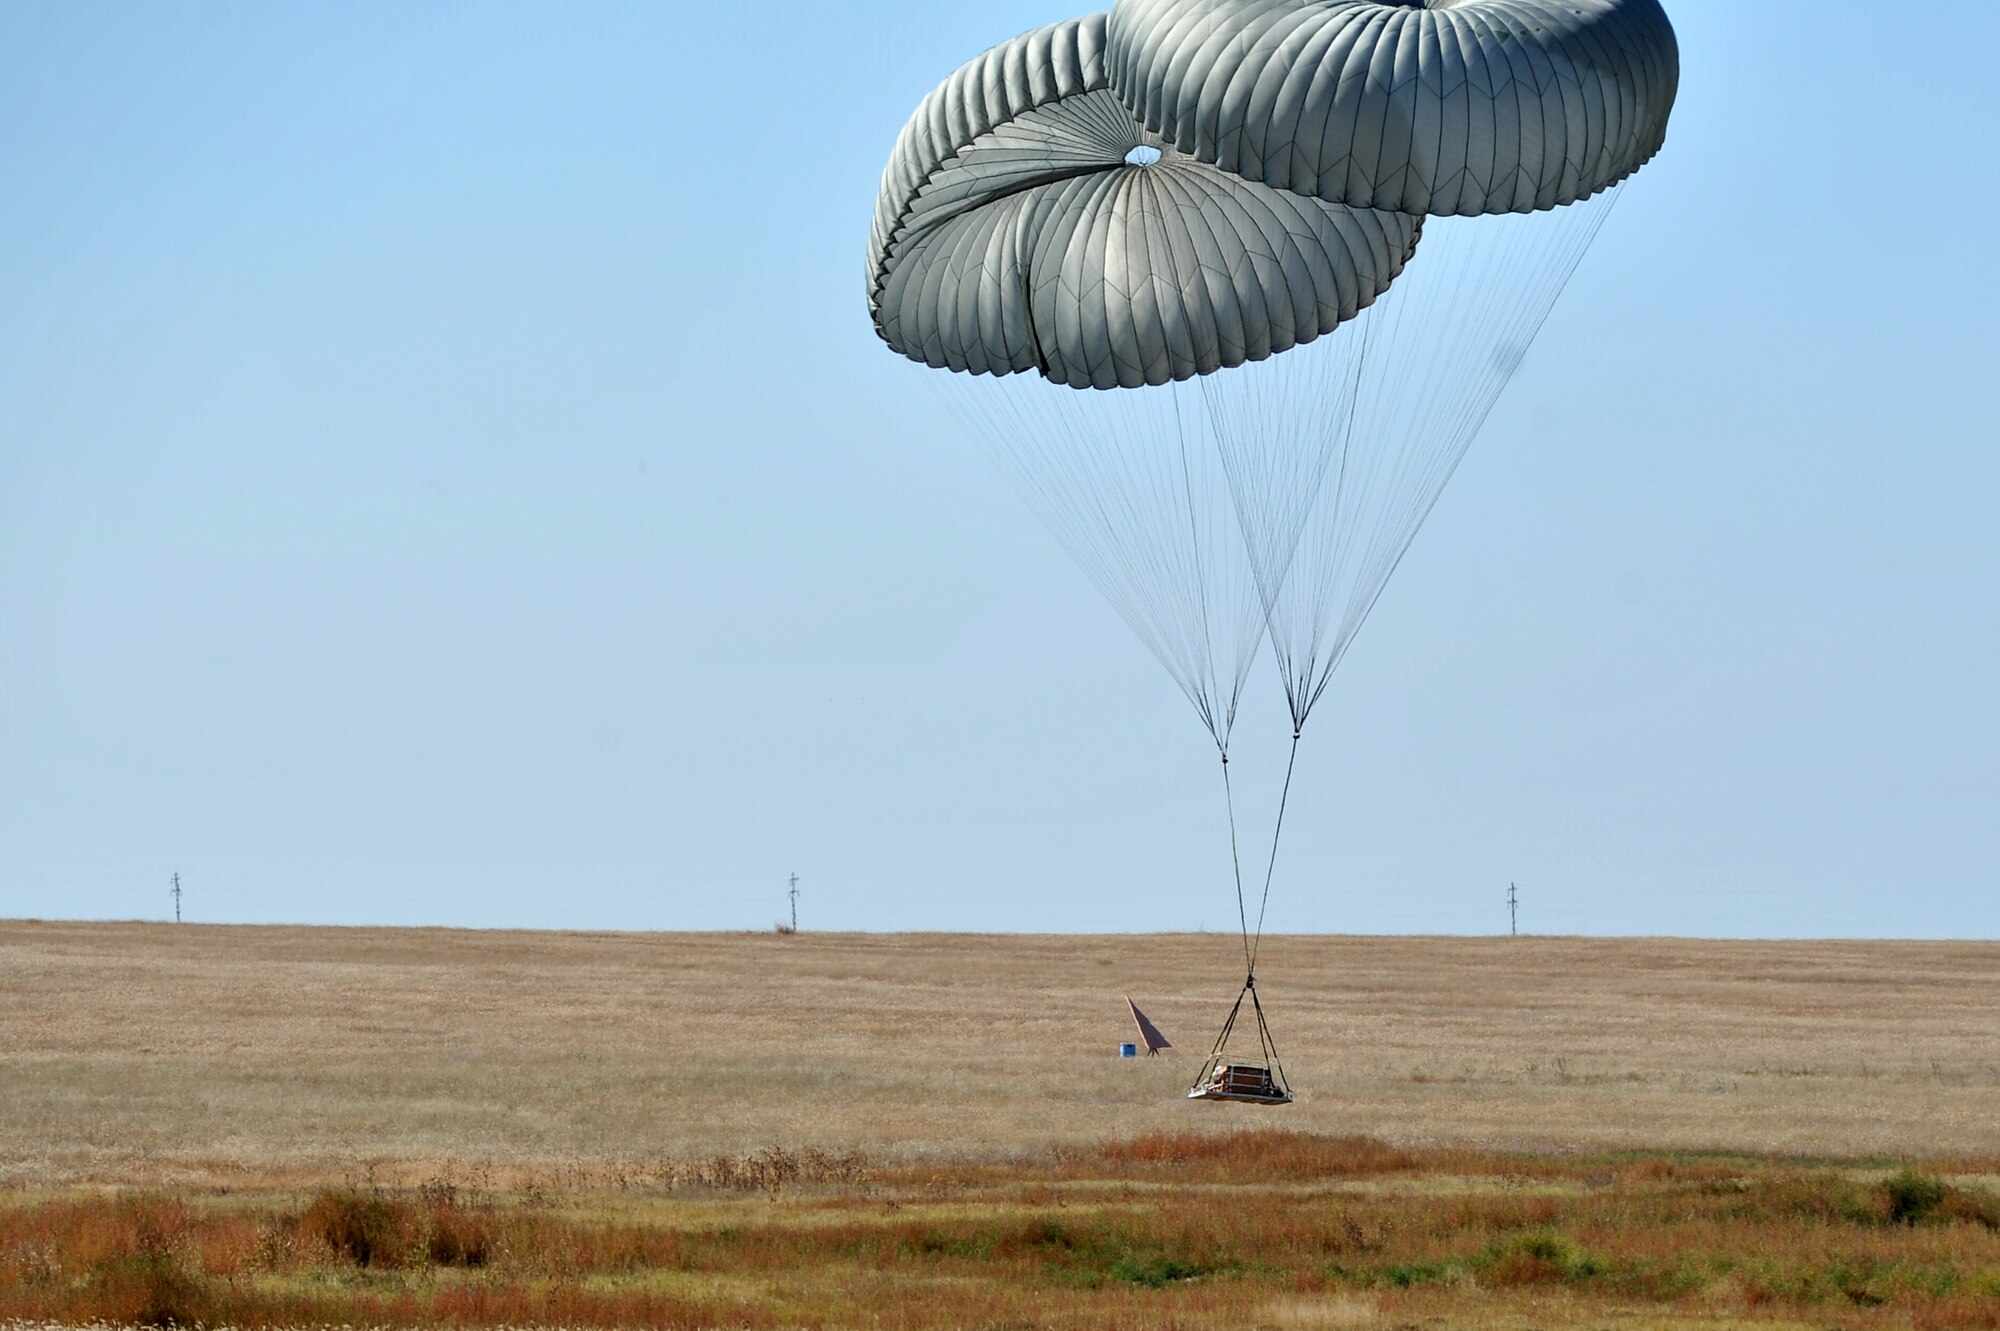 HOLLIS, Okla. – A cargo pallet safely lands in a field after being dropped from a U.S. Air Force C-17 Globemaster III cargo aircraft during an airdrop training mission Oct. 30, 2014. The pallets used for training are made of lumber or water and can weigh up to 4,000 pounds. The 97th Logistics Readiness Squadron provides the pallets to the 58th Airlift Squadron used during routine loadmaster training missions based out of Altus Air Force Base. (U.S. Air Force Photo by Senior Airman Dillon Davis/Released)